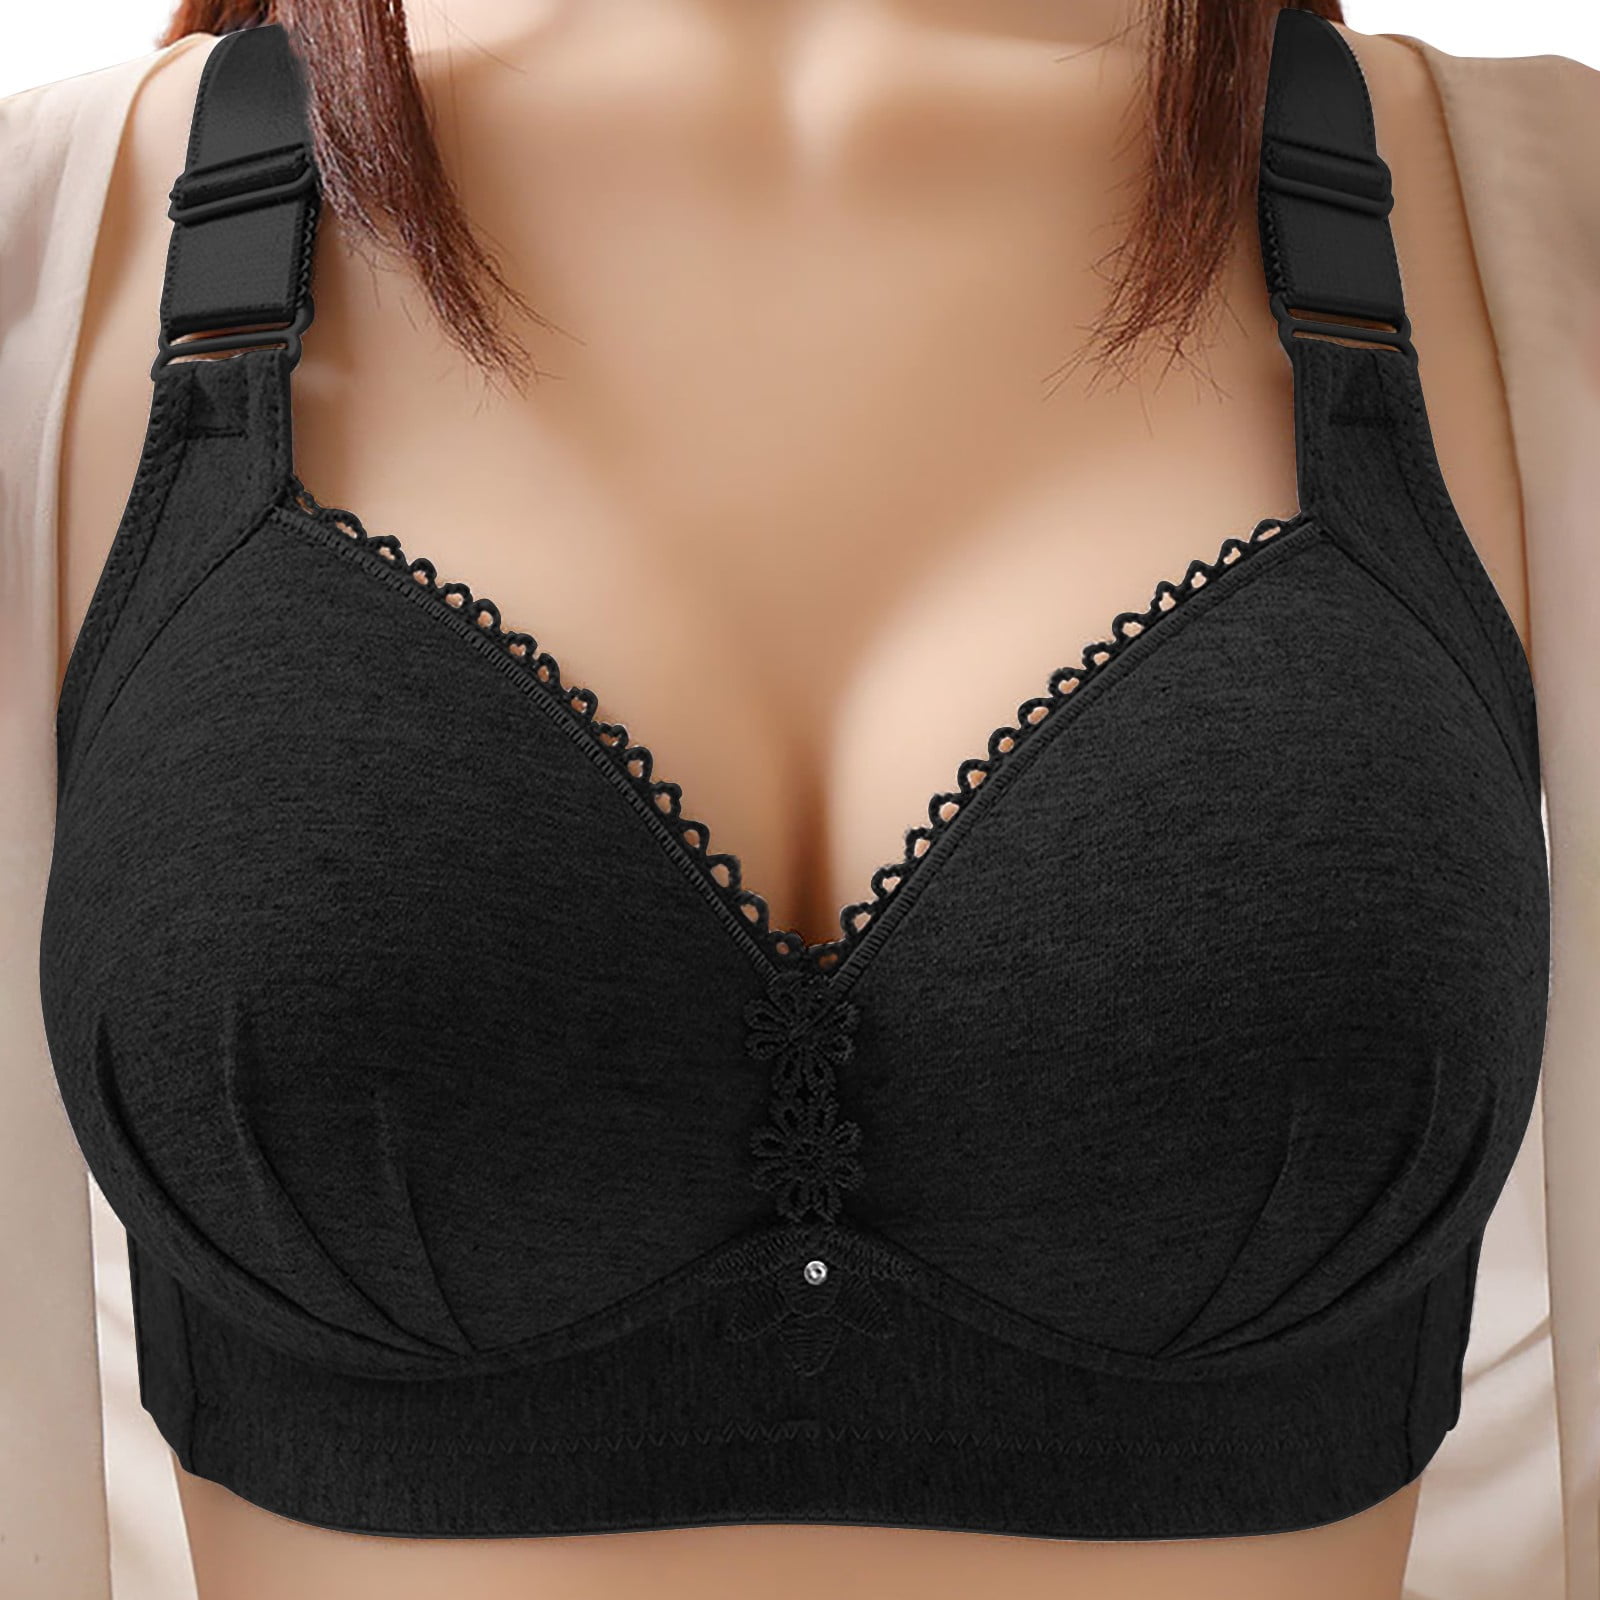 LEEy-world Women'S Lingerie Women's Plus Size Minimizer Bra for Large Bust  Full Coverage Figure Non Padded Wirefree,Black 